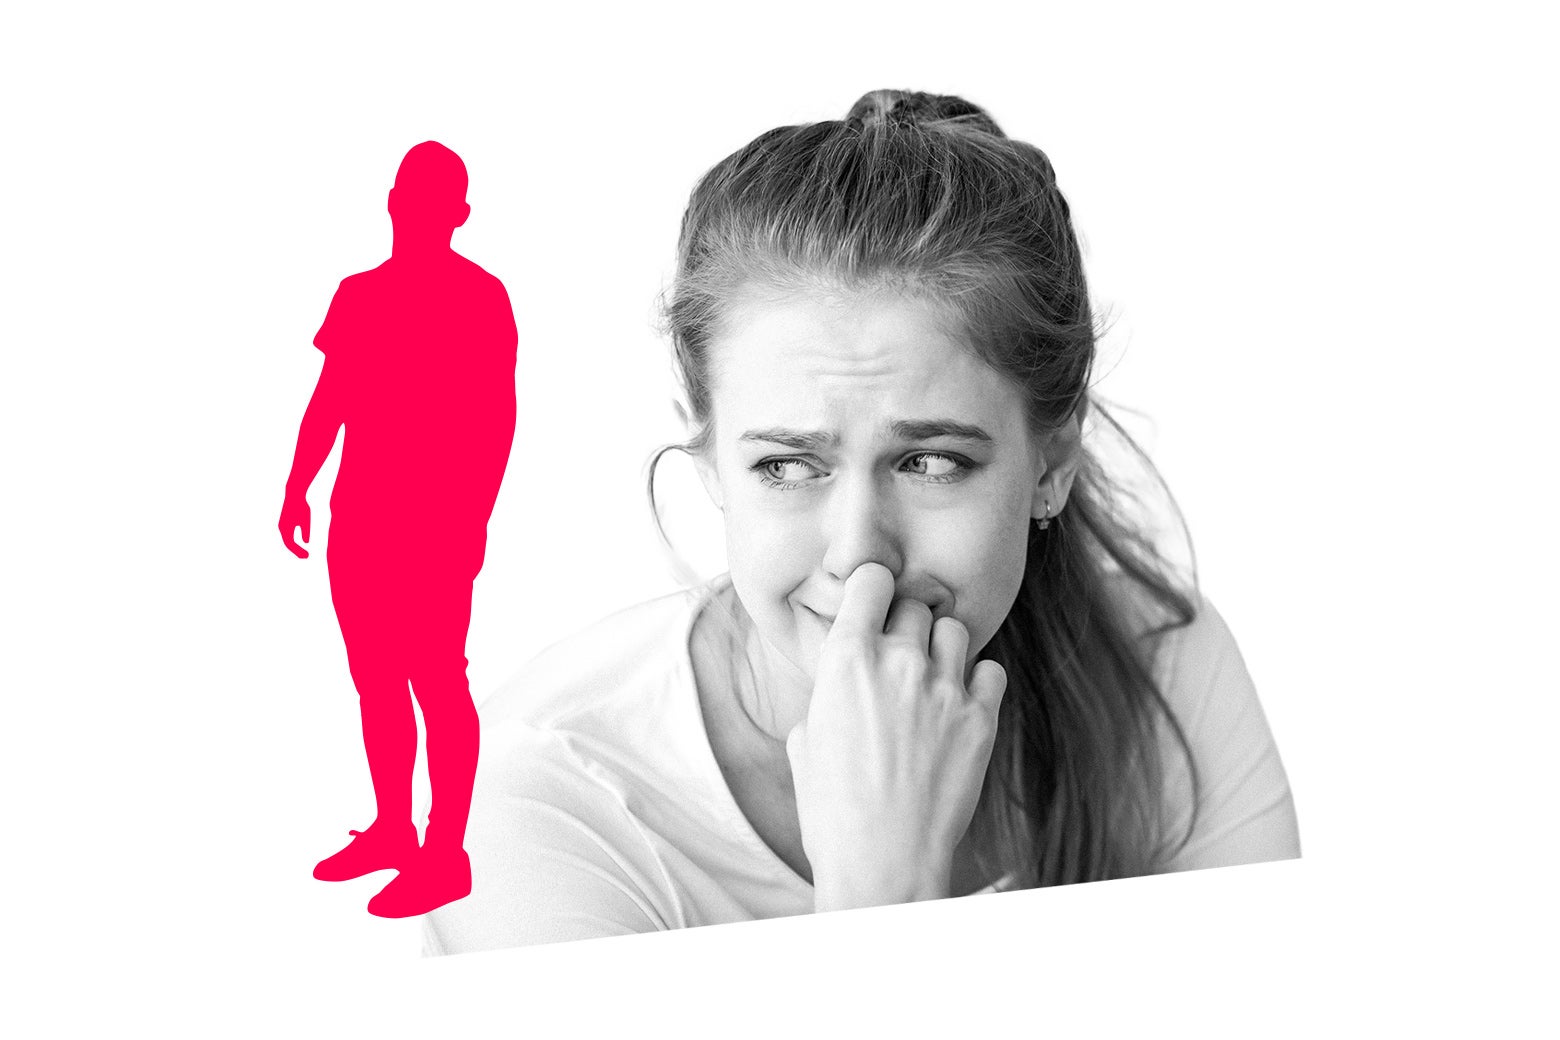 A young woman looks sad at the silhouette of a man.